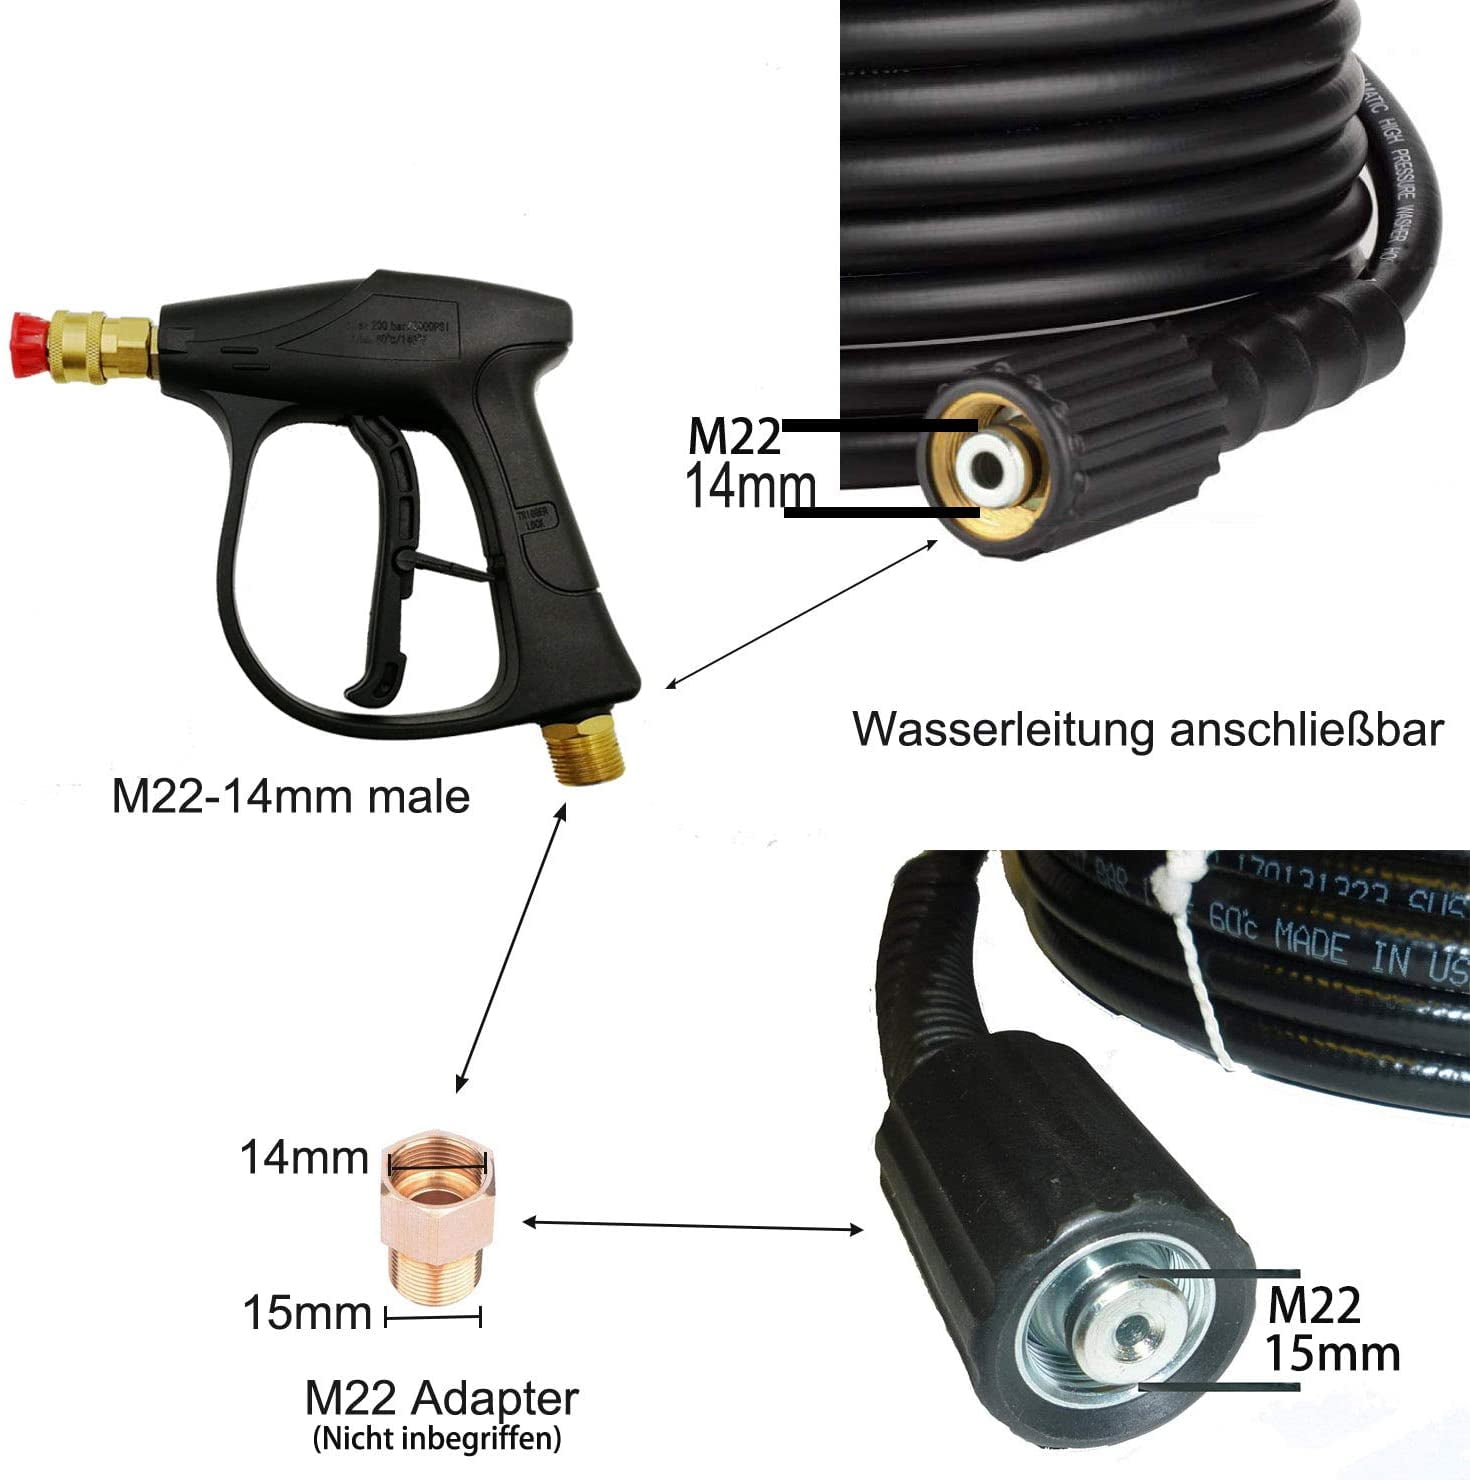 3000 Accessories PSI High Pressure Power Washer Short Gun Kit With M22-14 Angle 